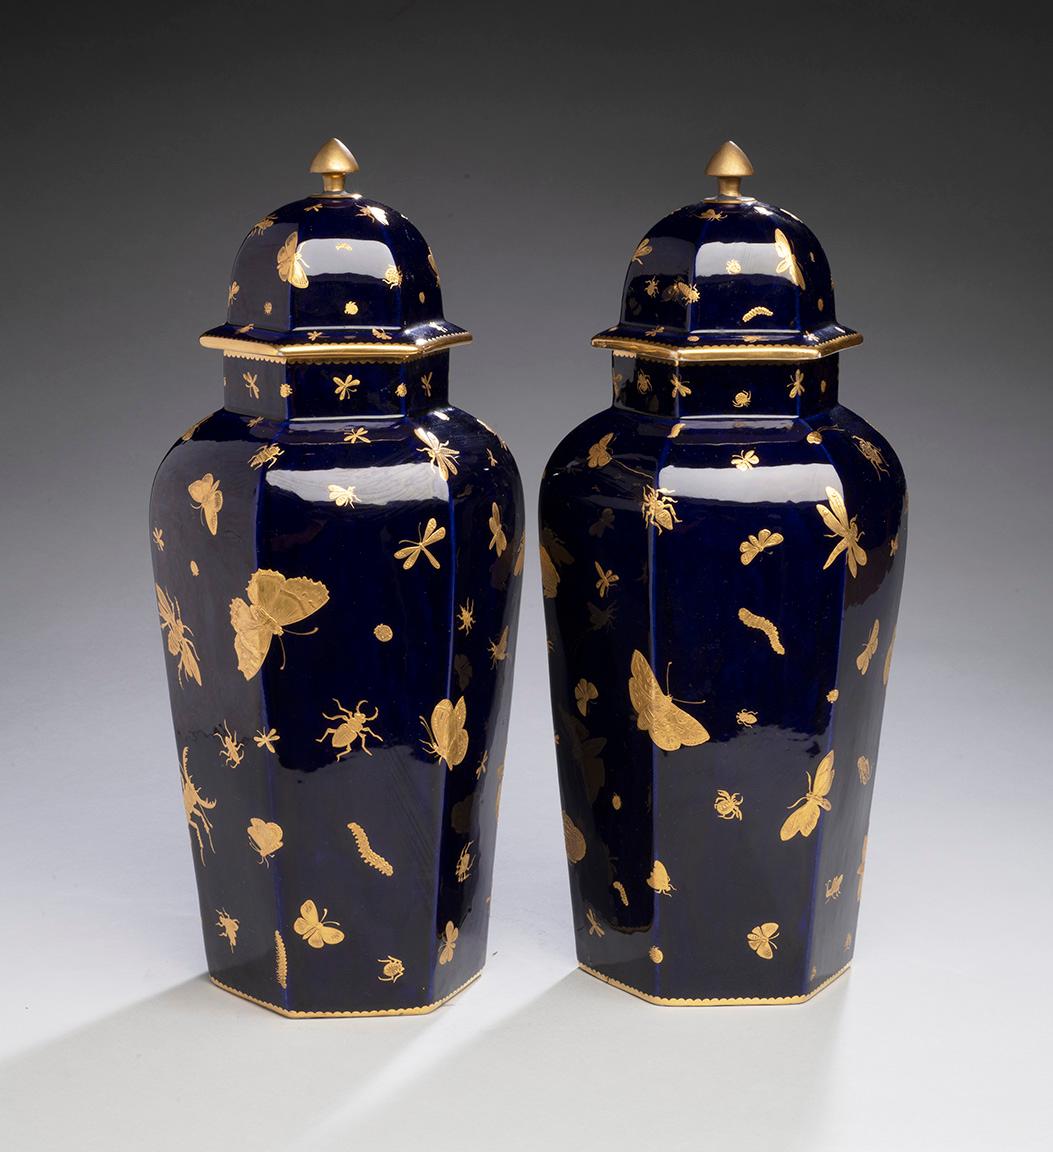 Pair of English Porcelain Vases with Insects from John Mortlock circa 1875